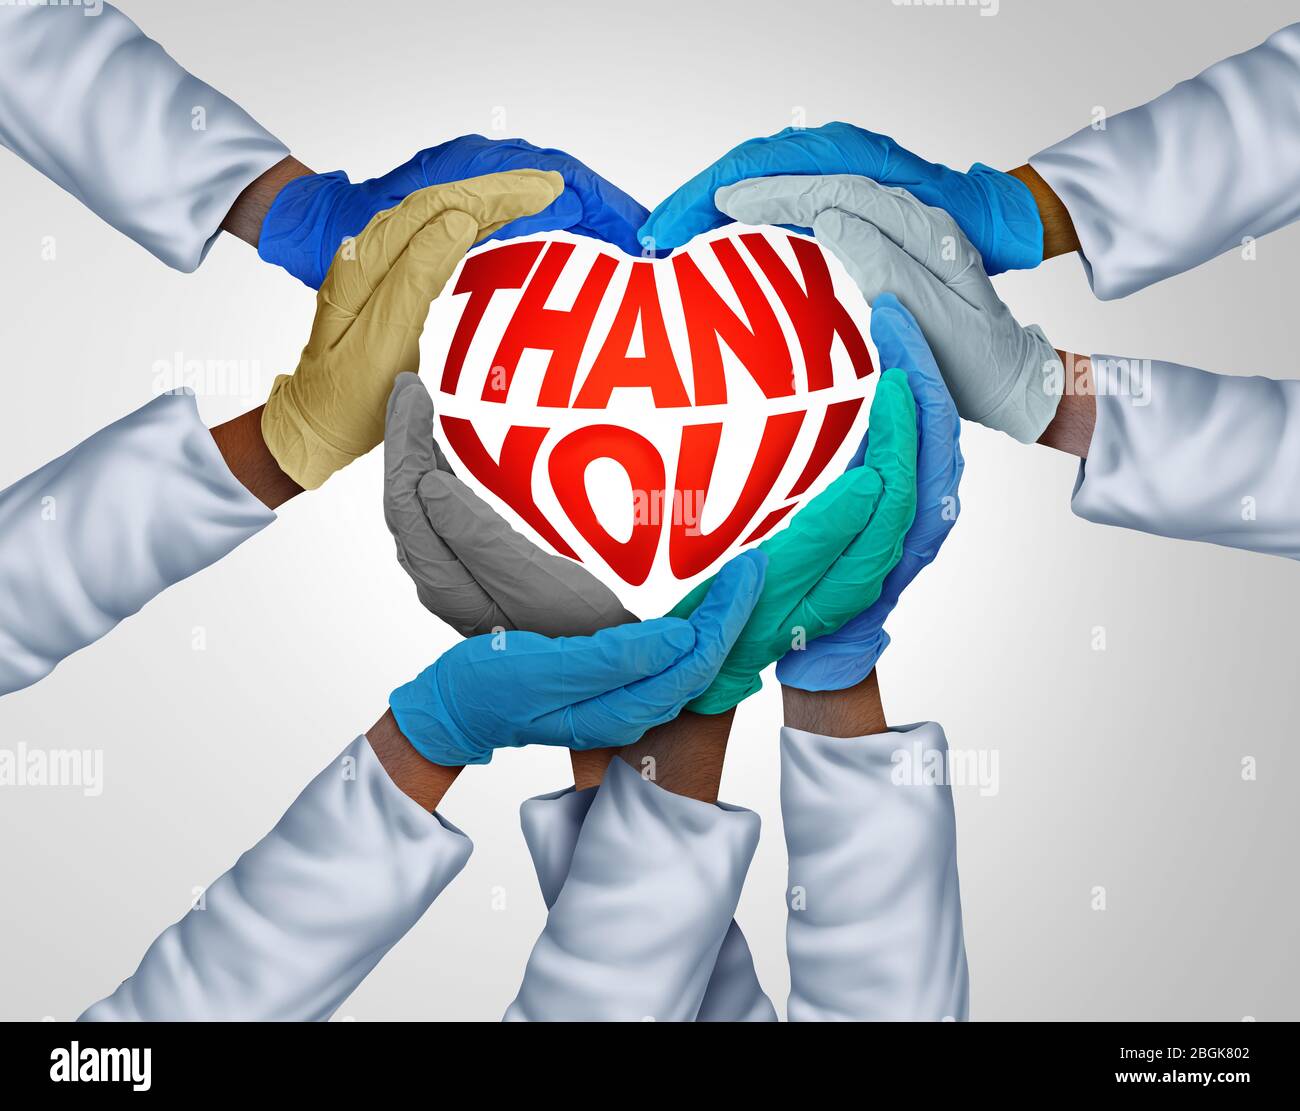 Healthcare workers thank you and medical teamwork or doctors unity and global health care appreciation as doctor hands in a group of diverse medics. Stock Photo